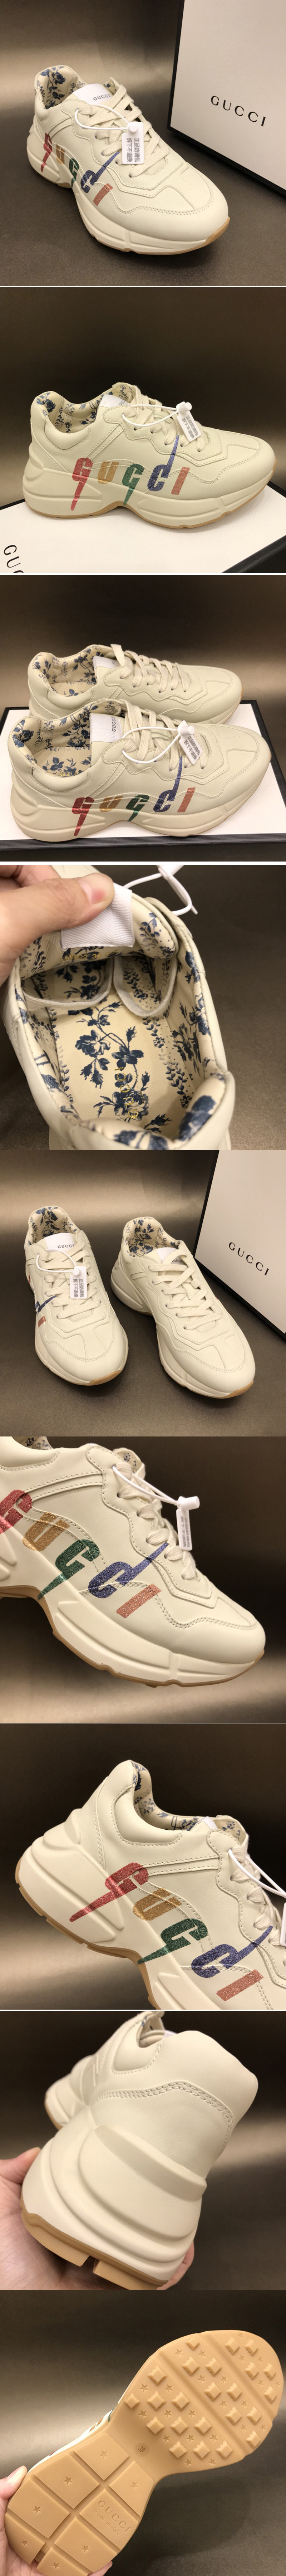 Replica Women and Men Gucci Rhyton leather sneaker with Gucci Blade in White Leather